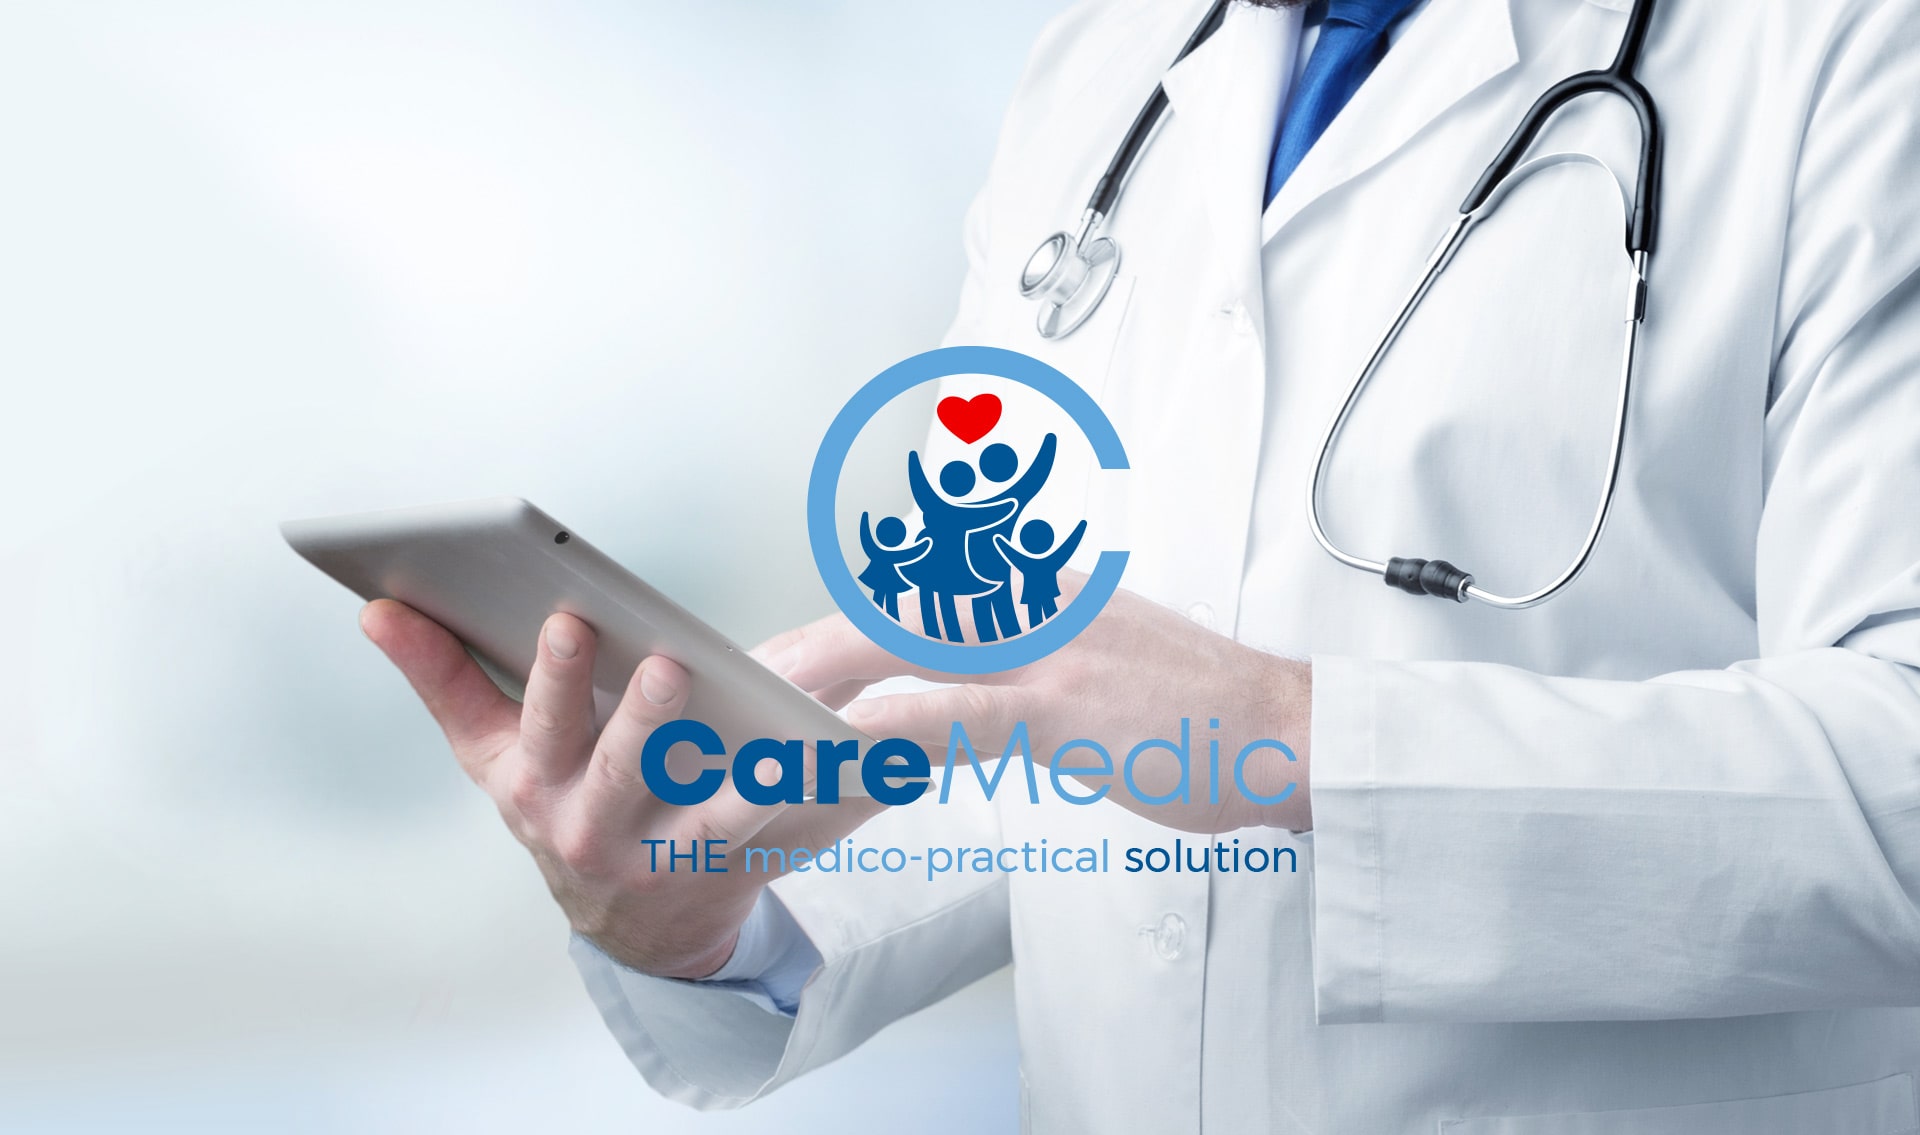 caremedic benefits for doctors pharmacists nurses patients centralized medical record simplified health benefits general